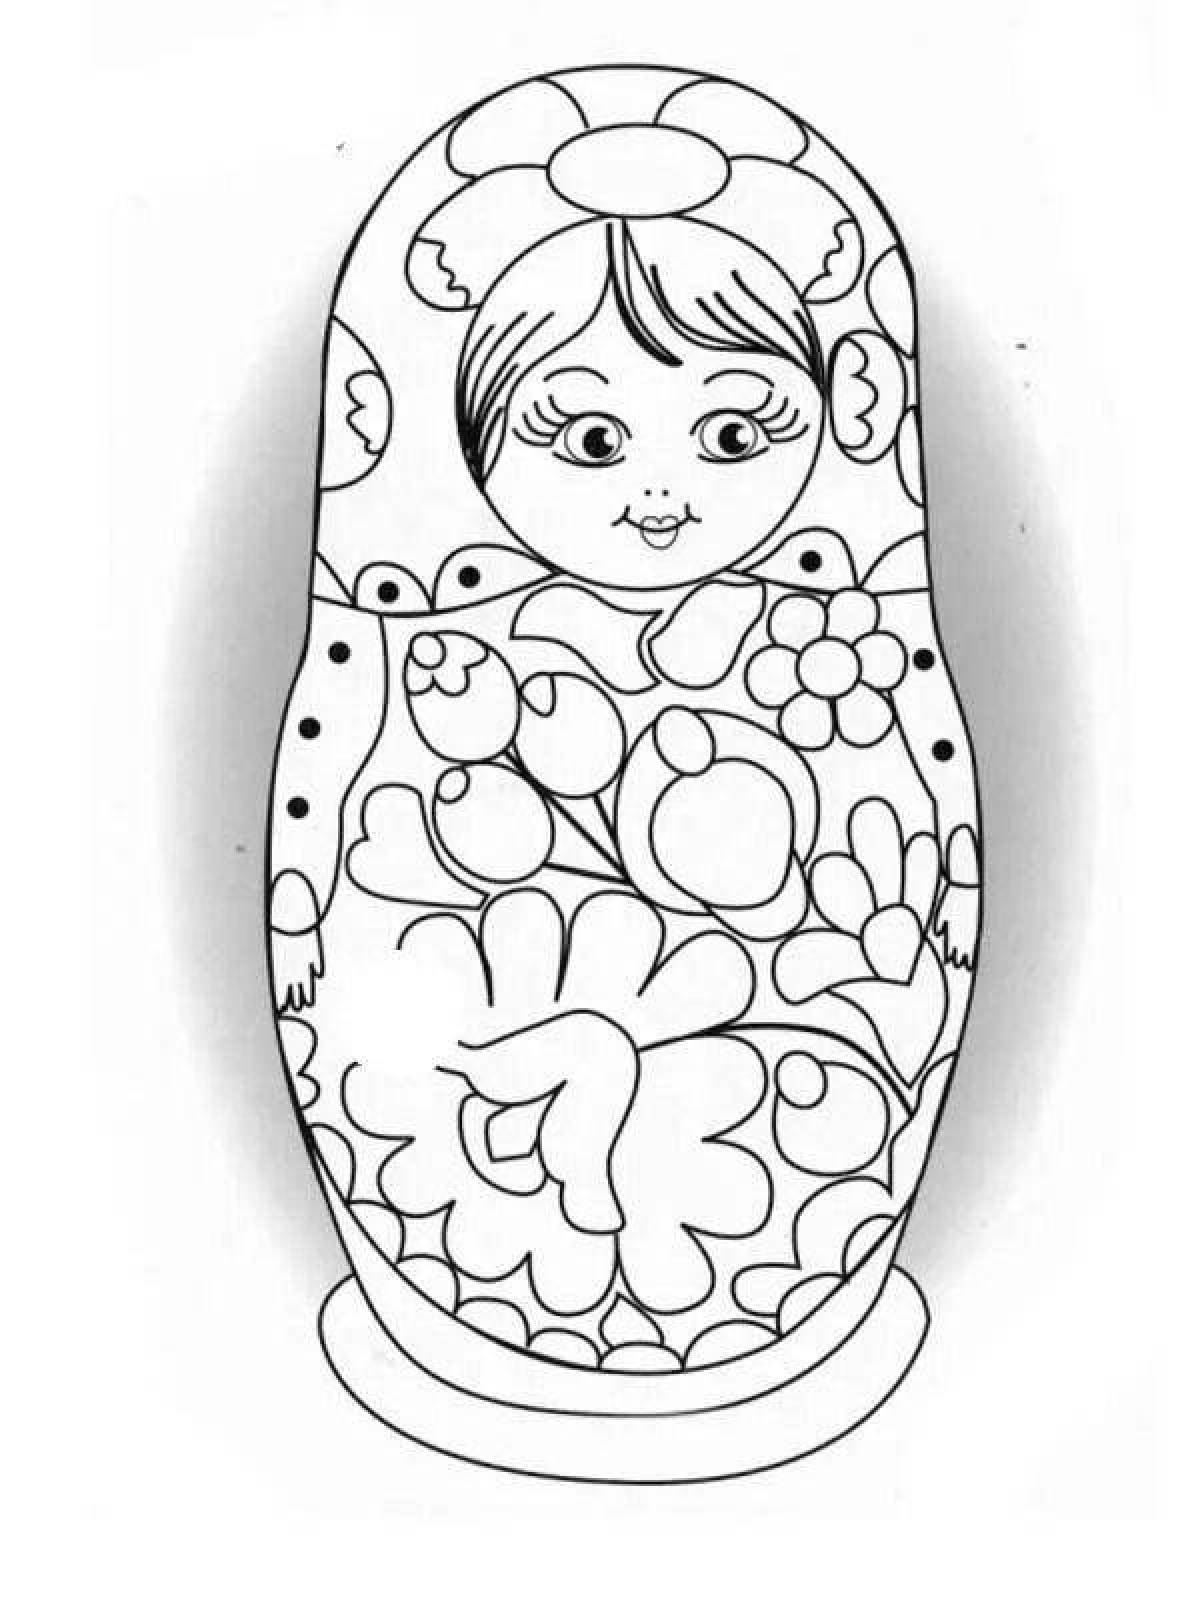 Bright Russian doll coloring